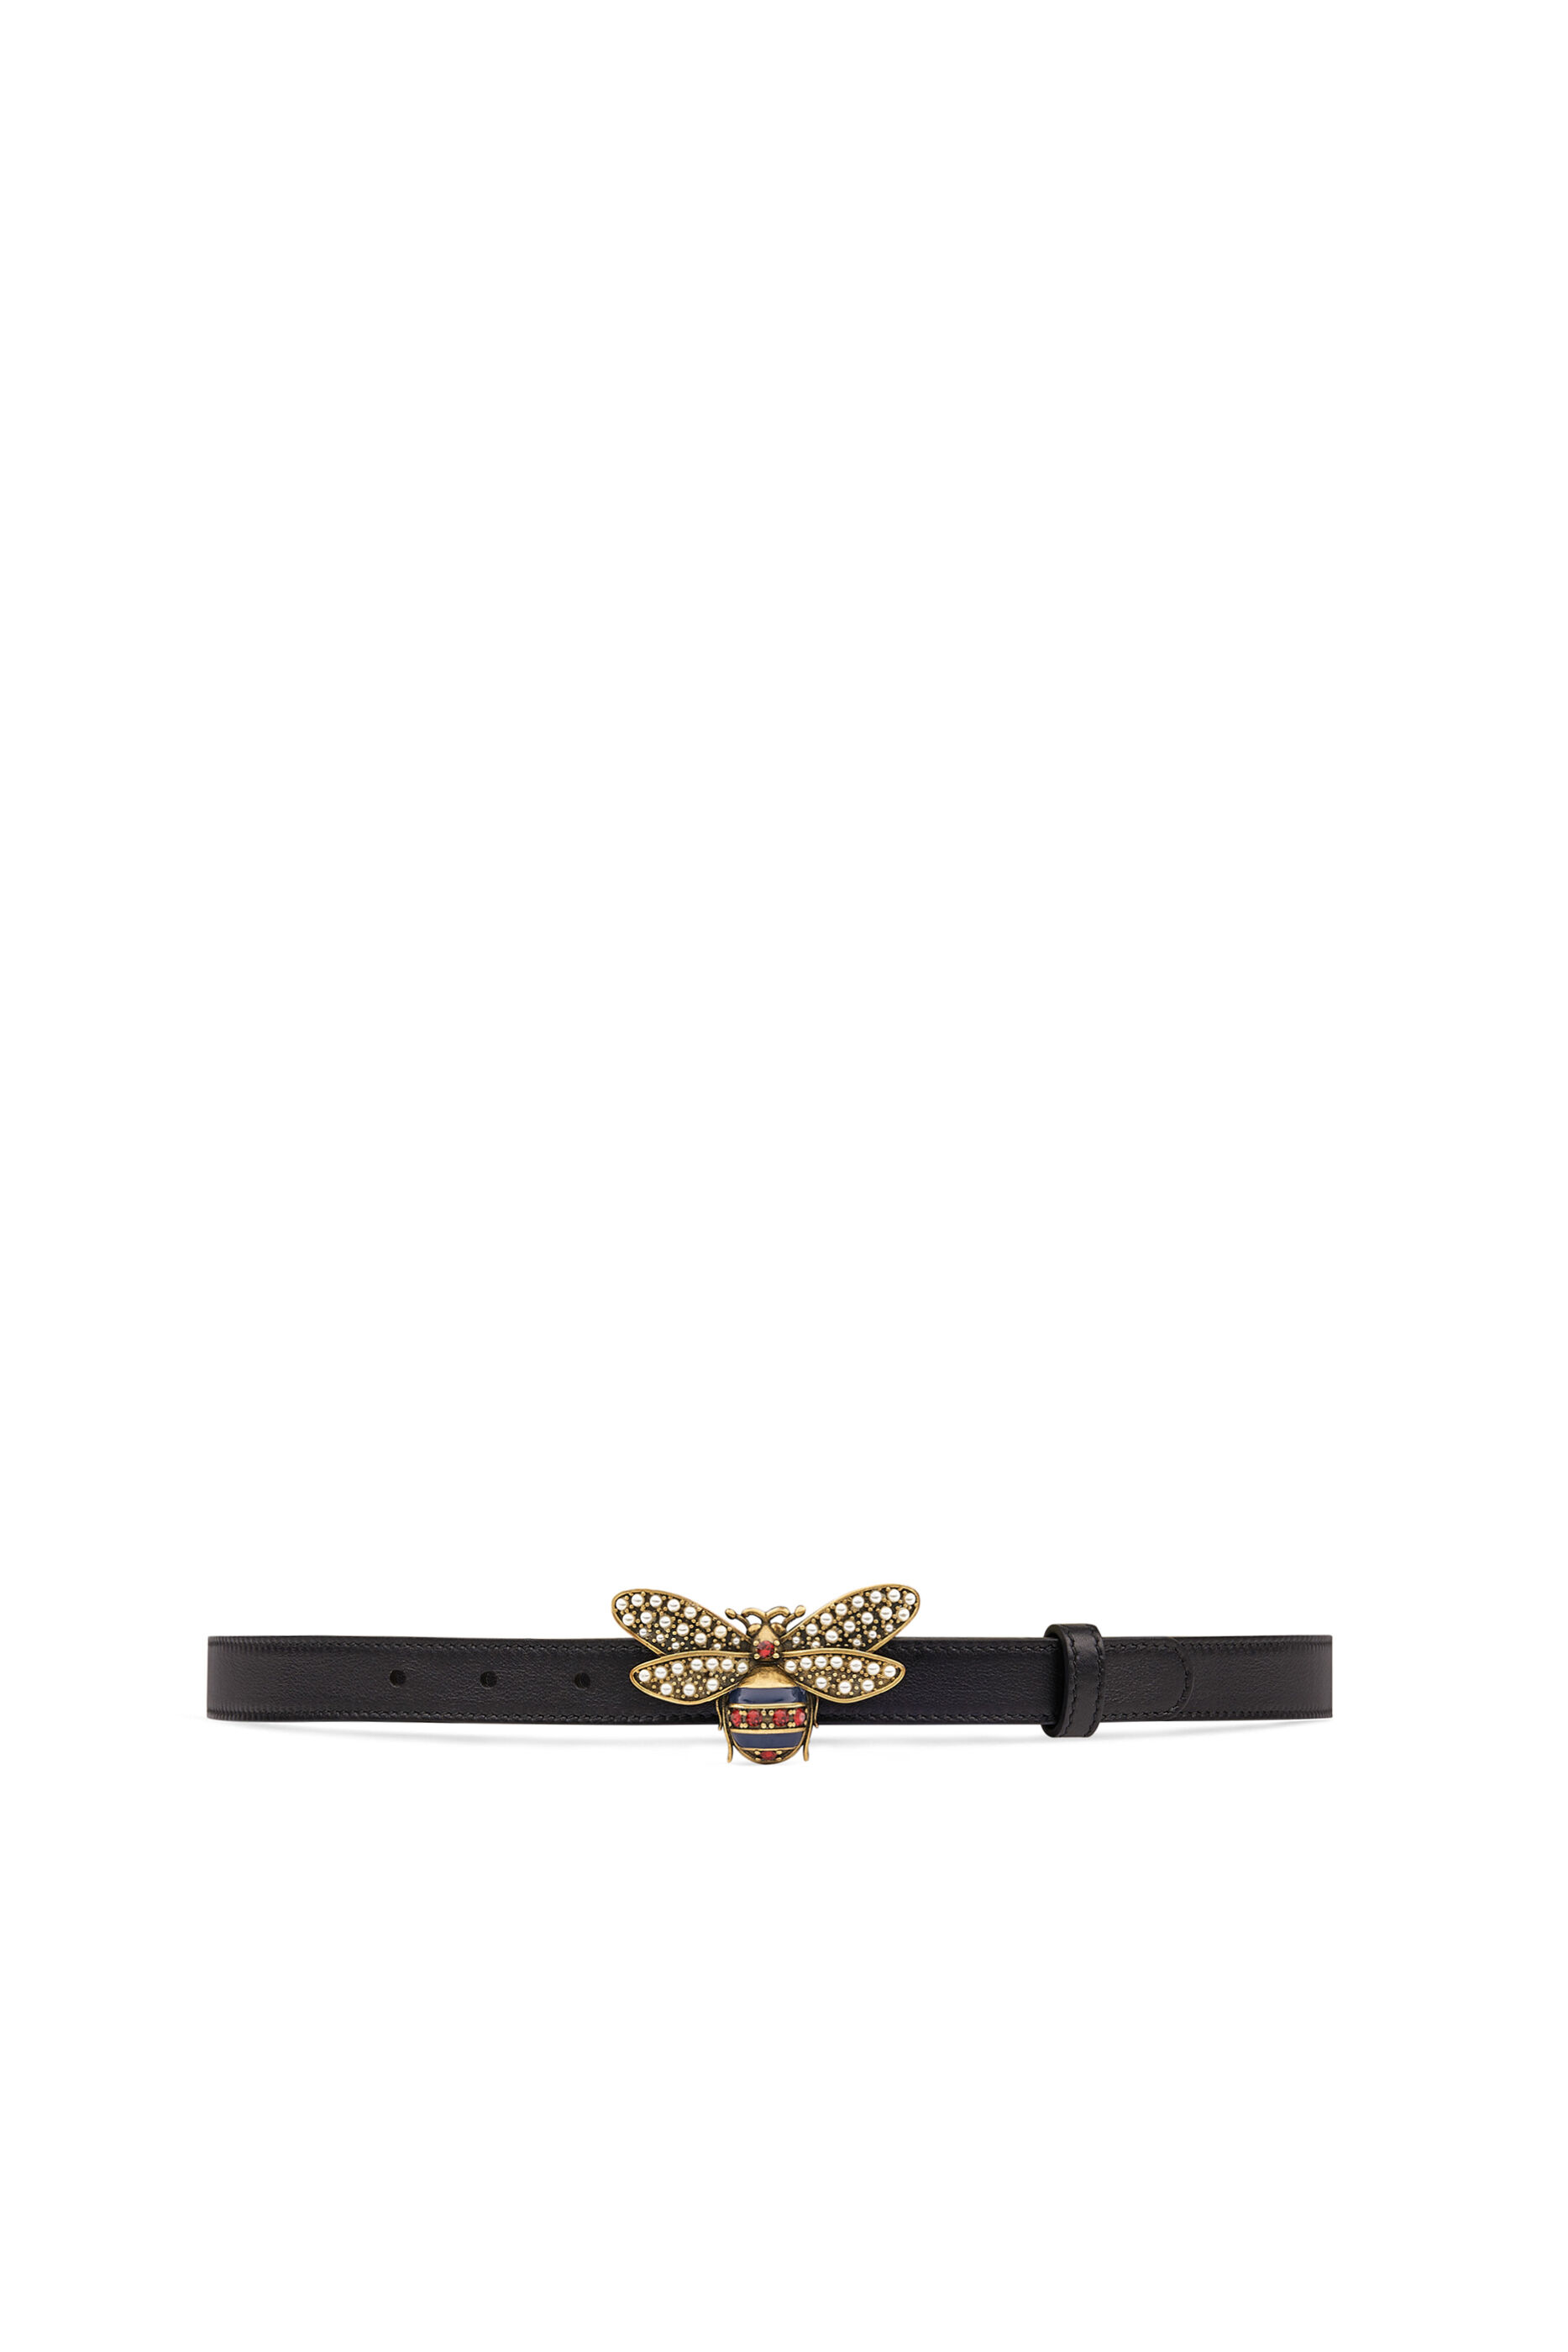 gucci belt with bee